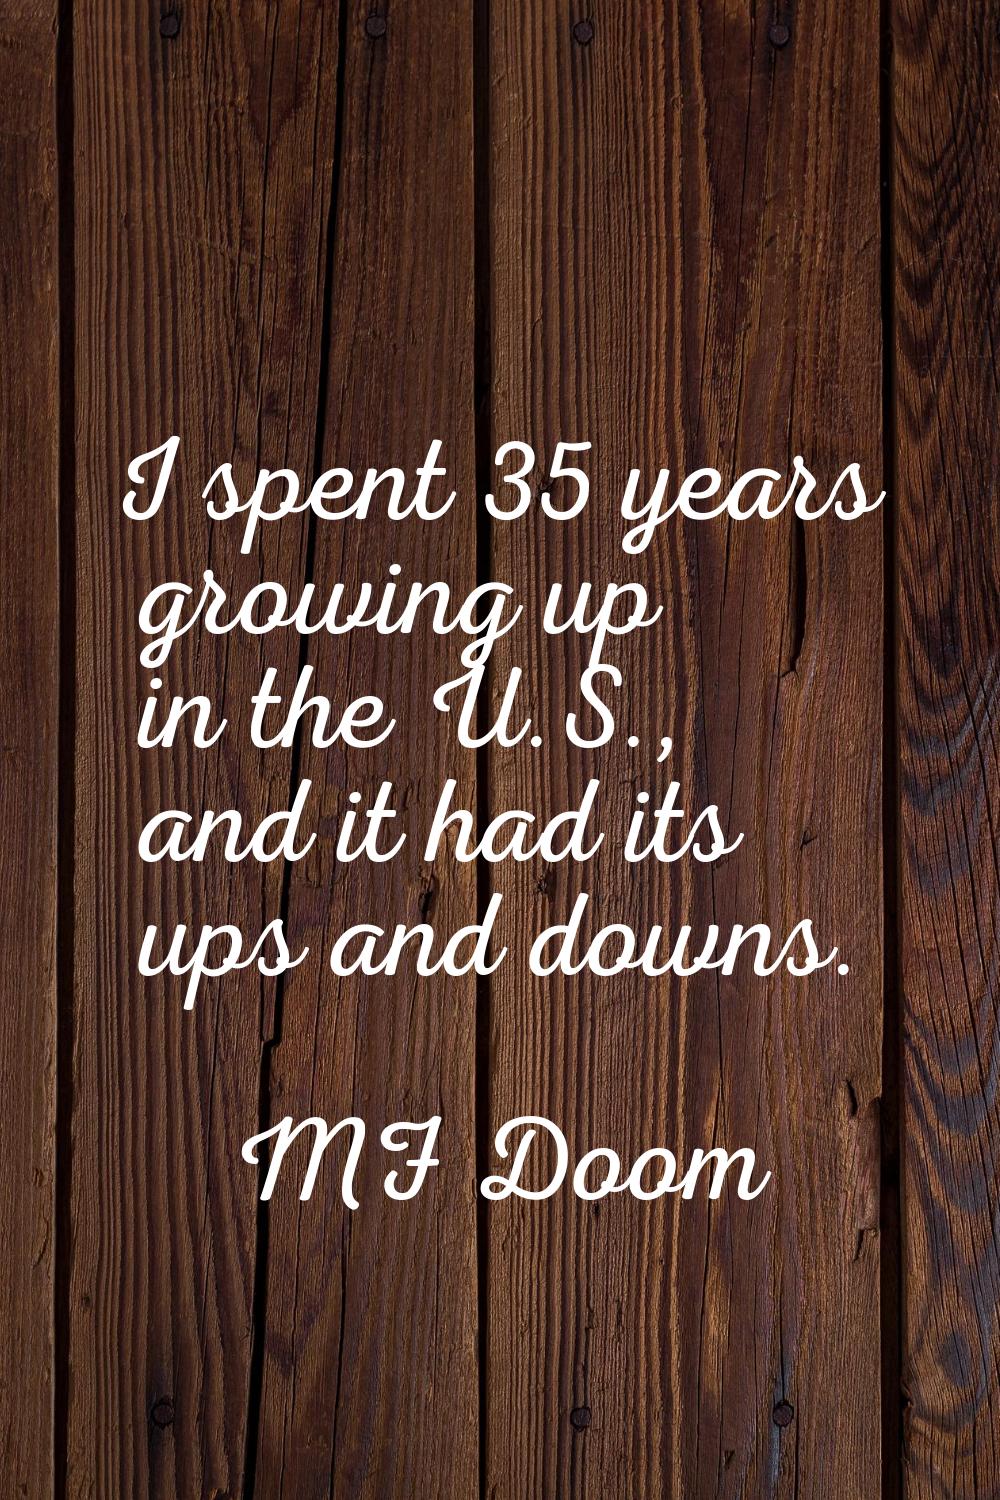 I spent 35 years growing up in the U.S., and it had its ups and downs.